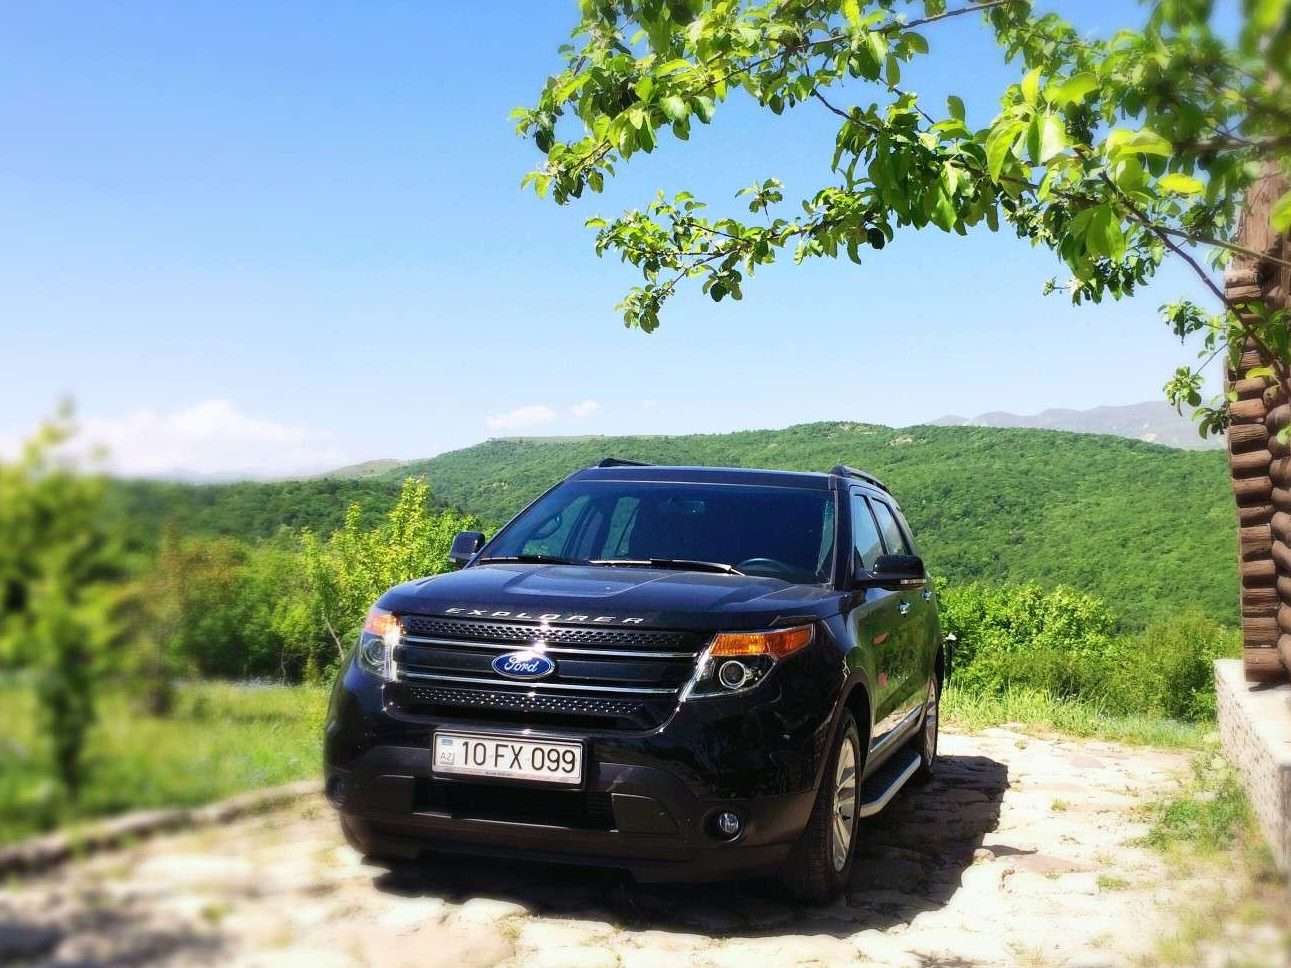 Black Ford Explorer parked in mountains